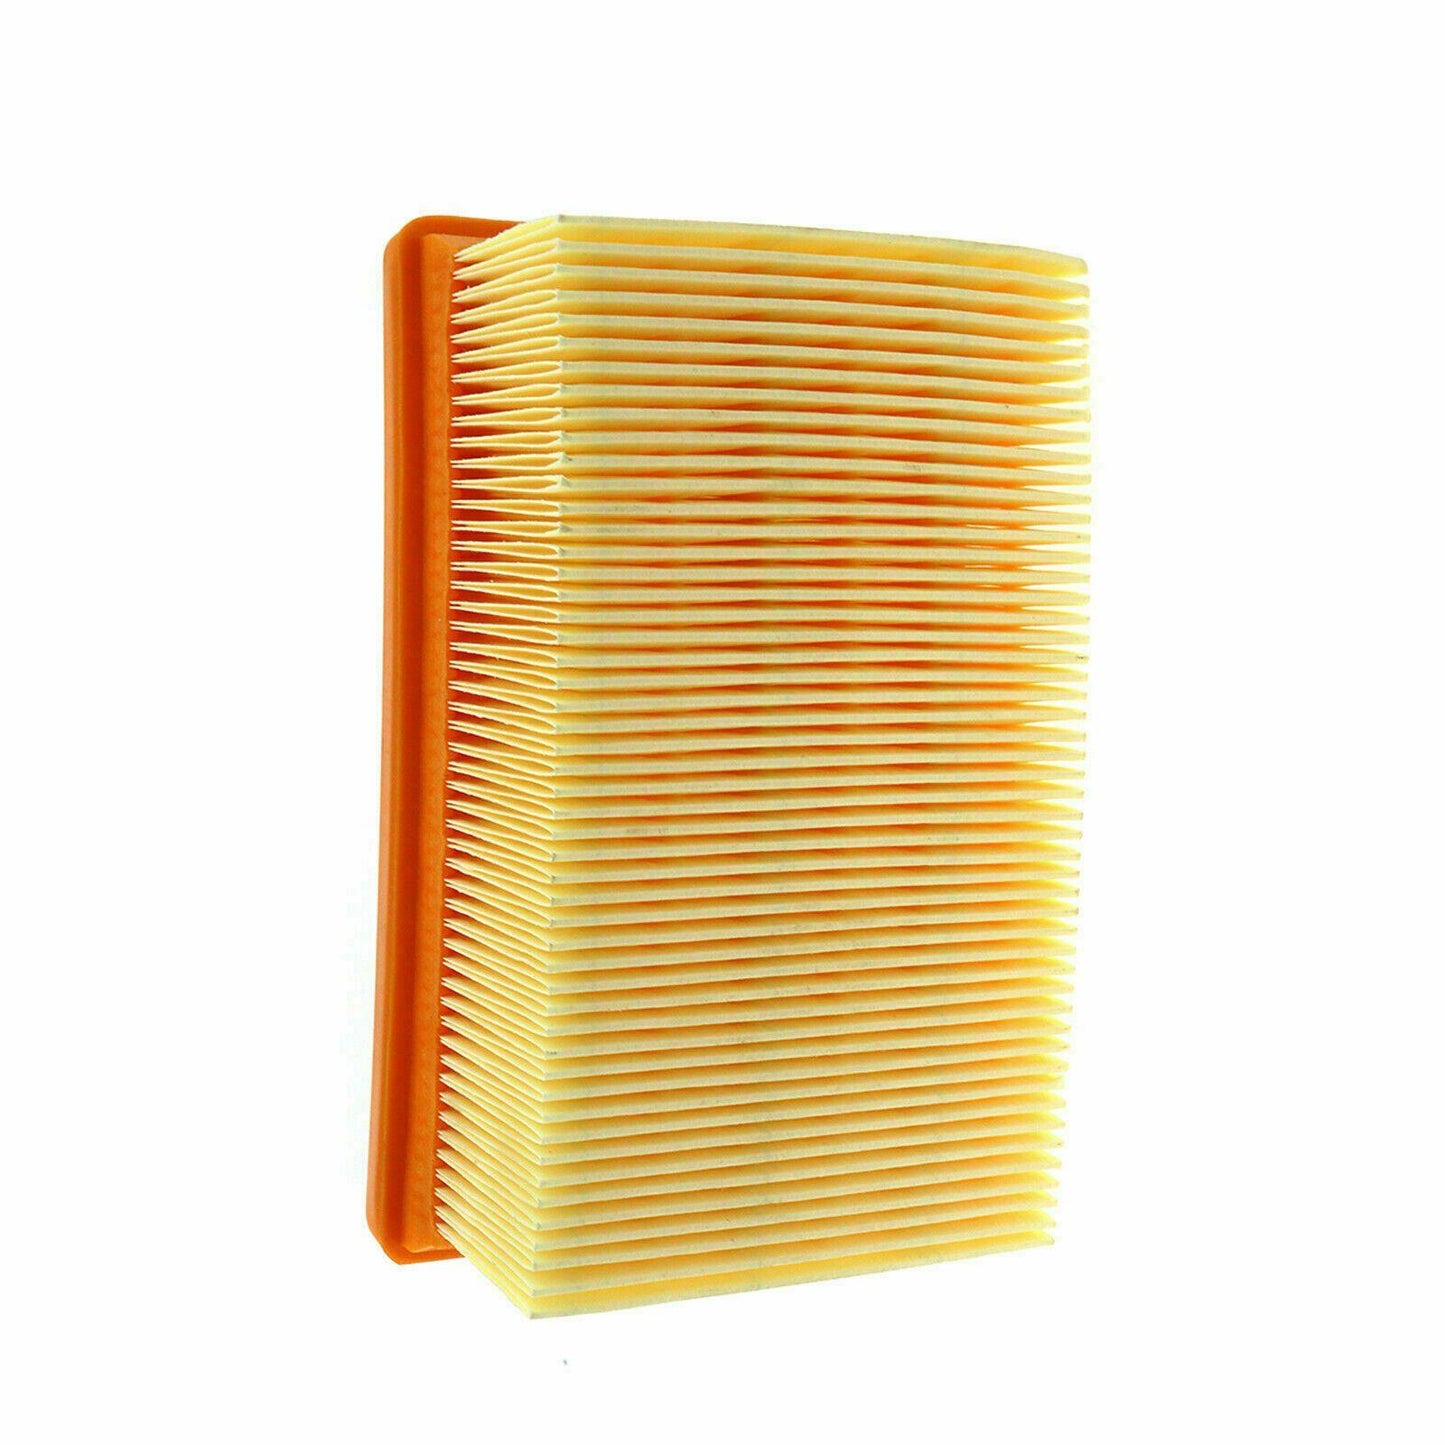 Vacuum Cleaner Flat Pleated Filter For Karcher MV4 MV5 MV6 WD4 WD5 WD6 WD4000 Sparesbarn